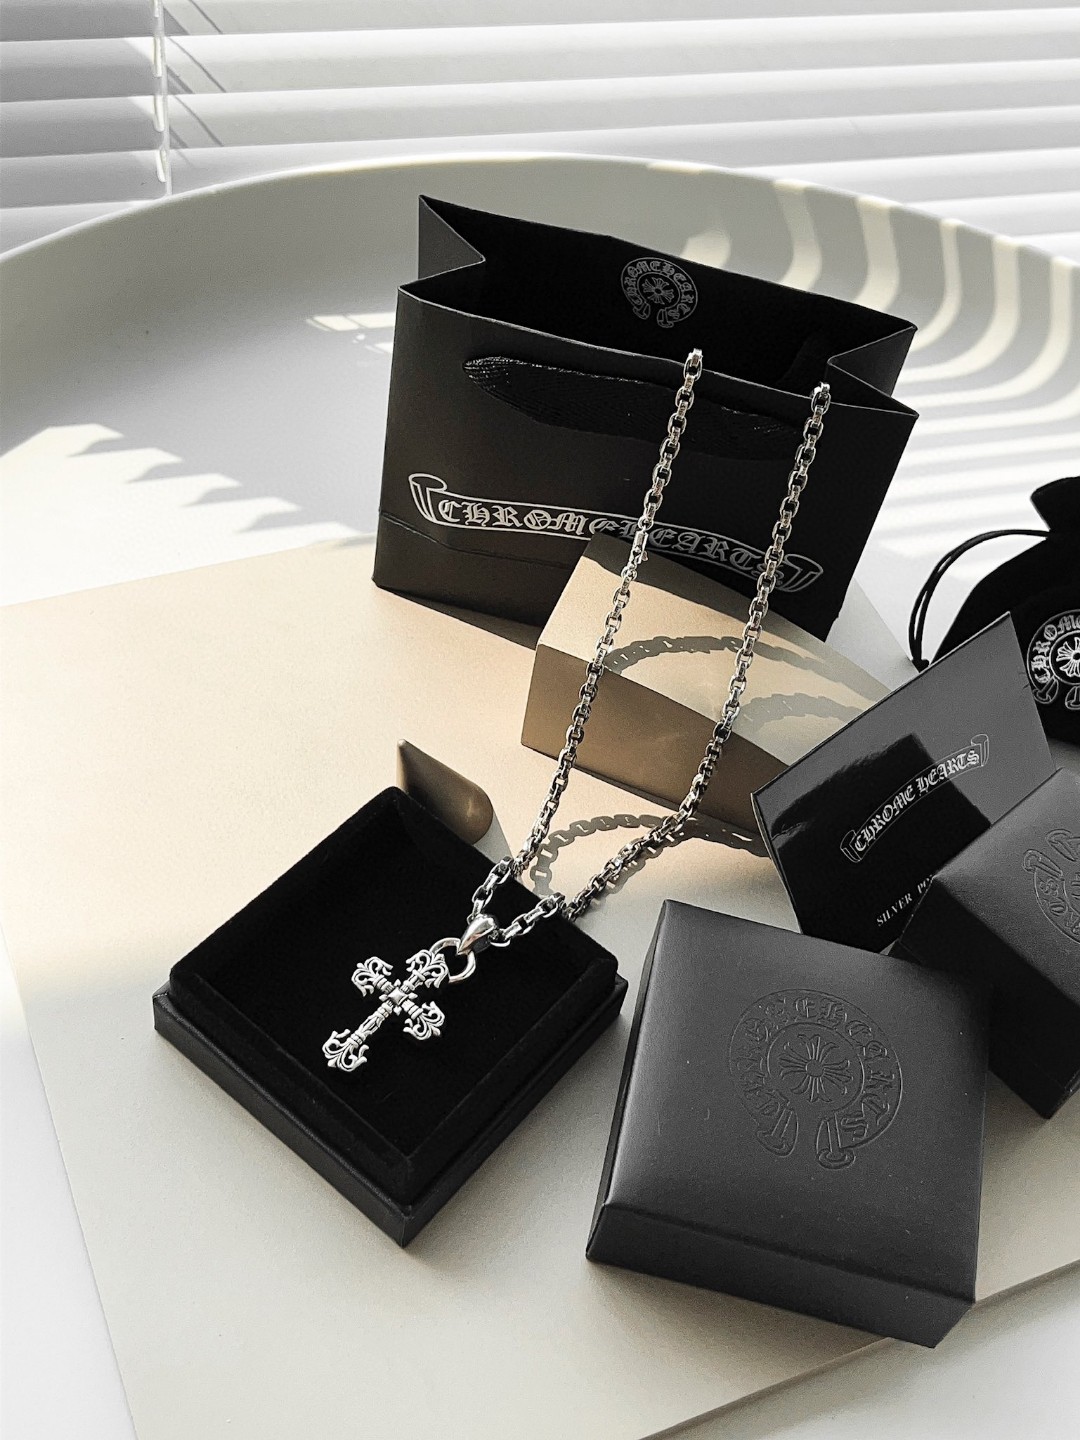 Find replica
 Chrome Hearts Jewelry Necklaces & Pendants Best Replica New Style
 Unisex Vintage Chains